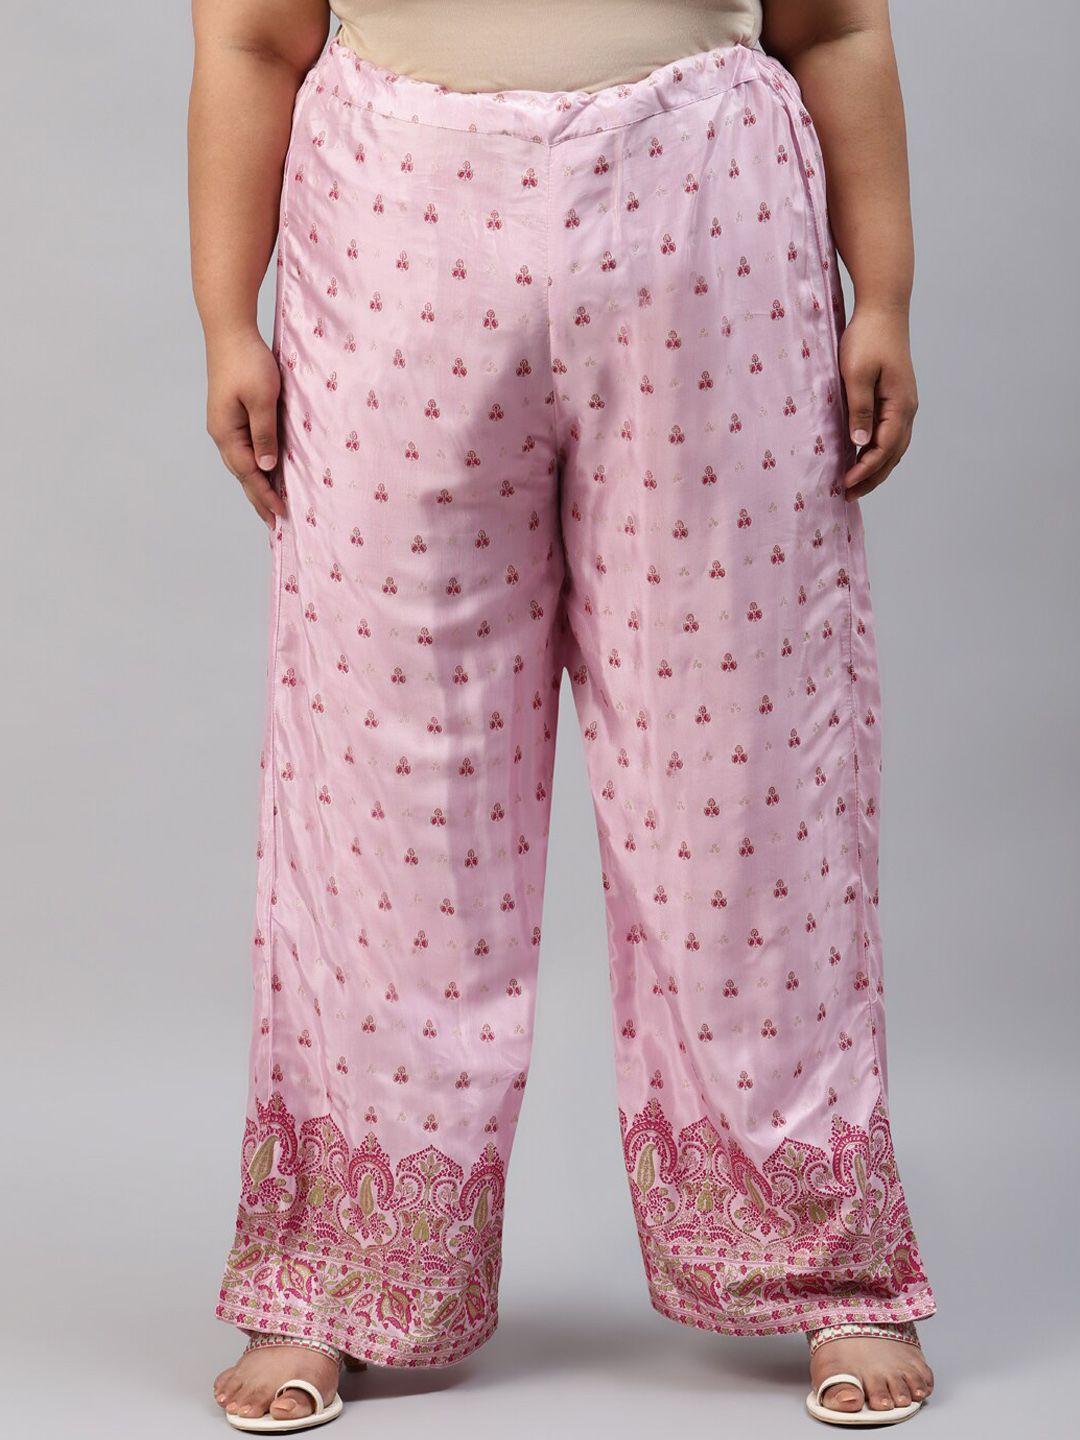 w women plus size pink floral printed trousers